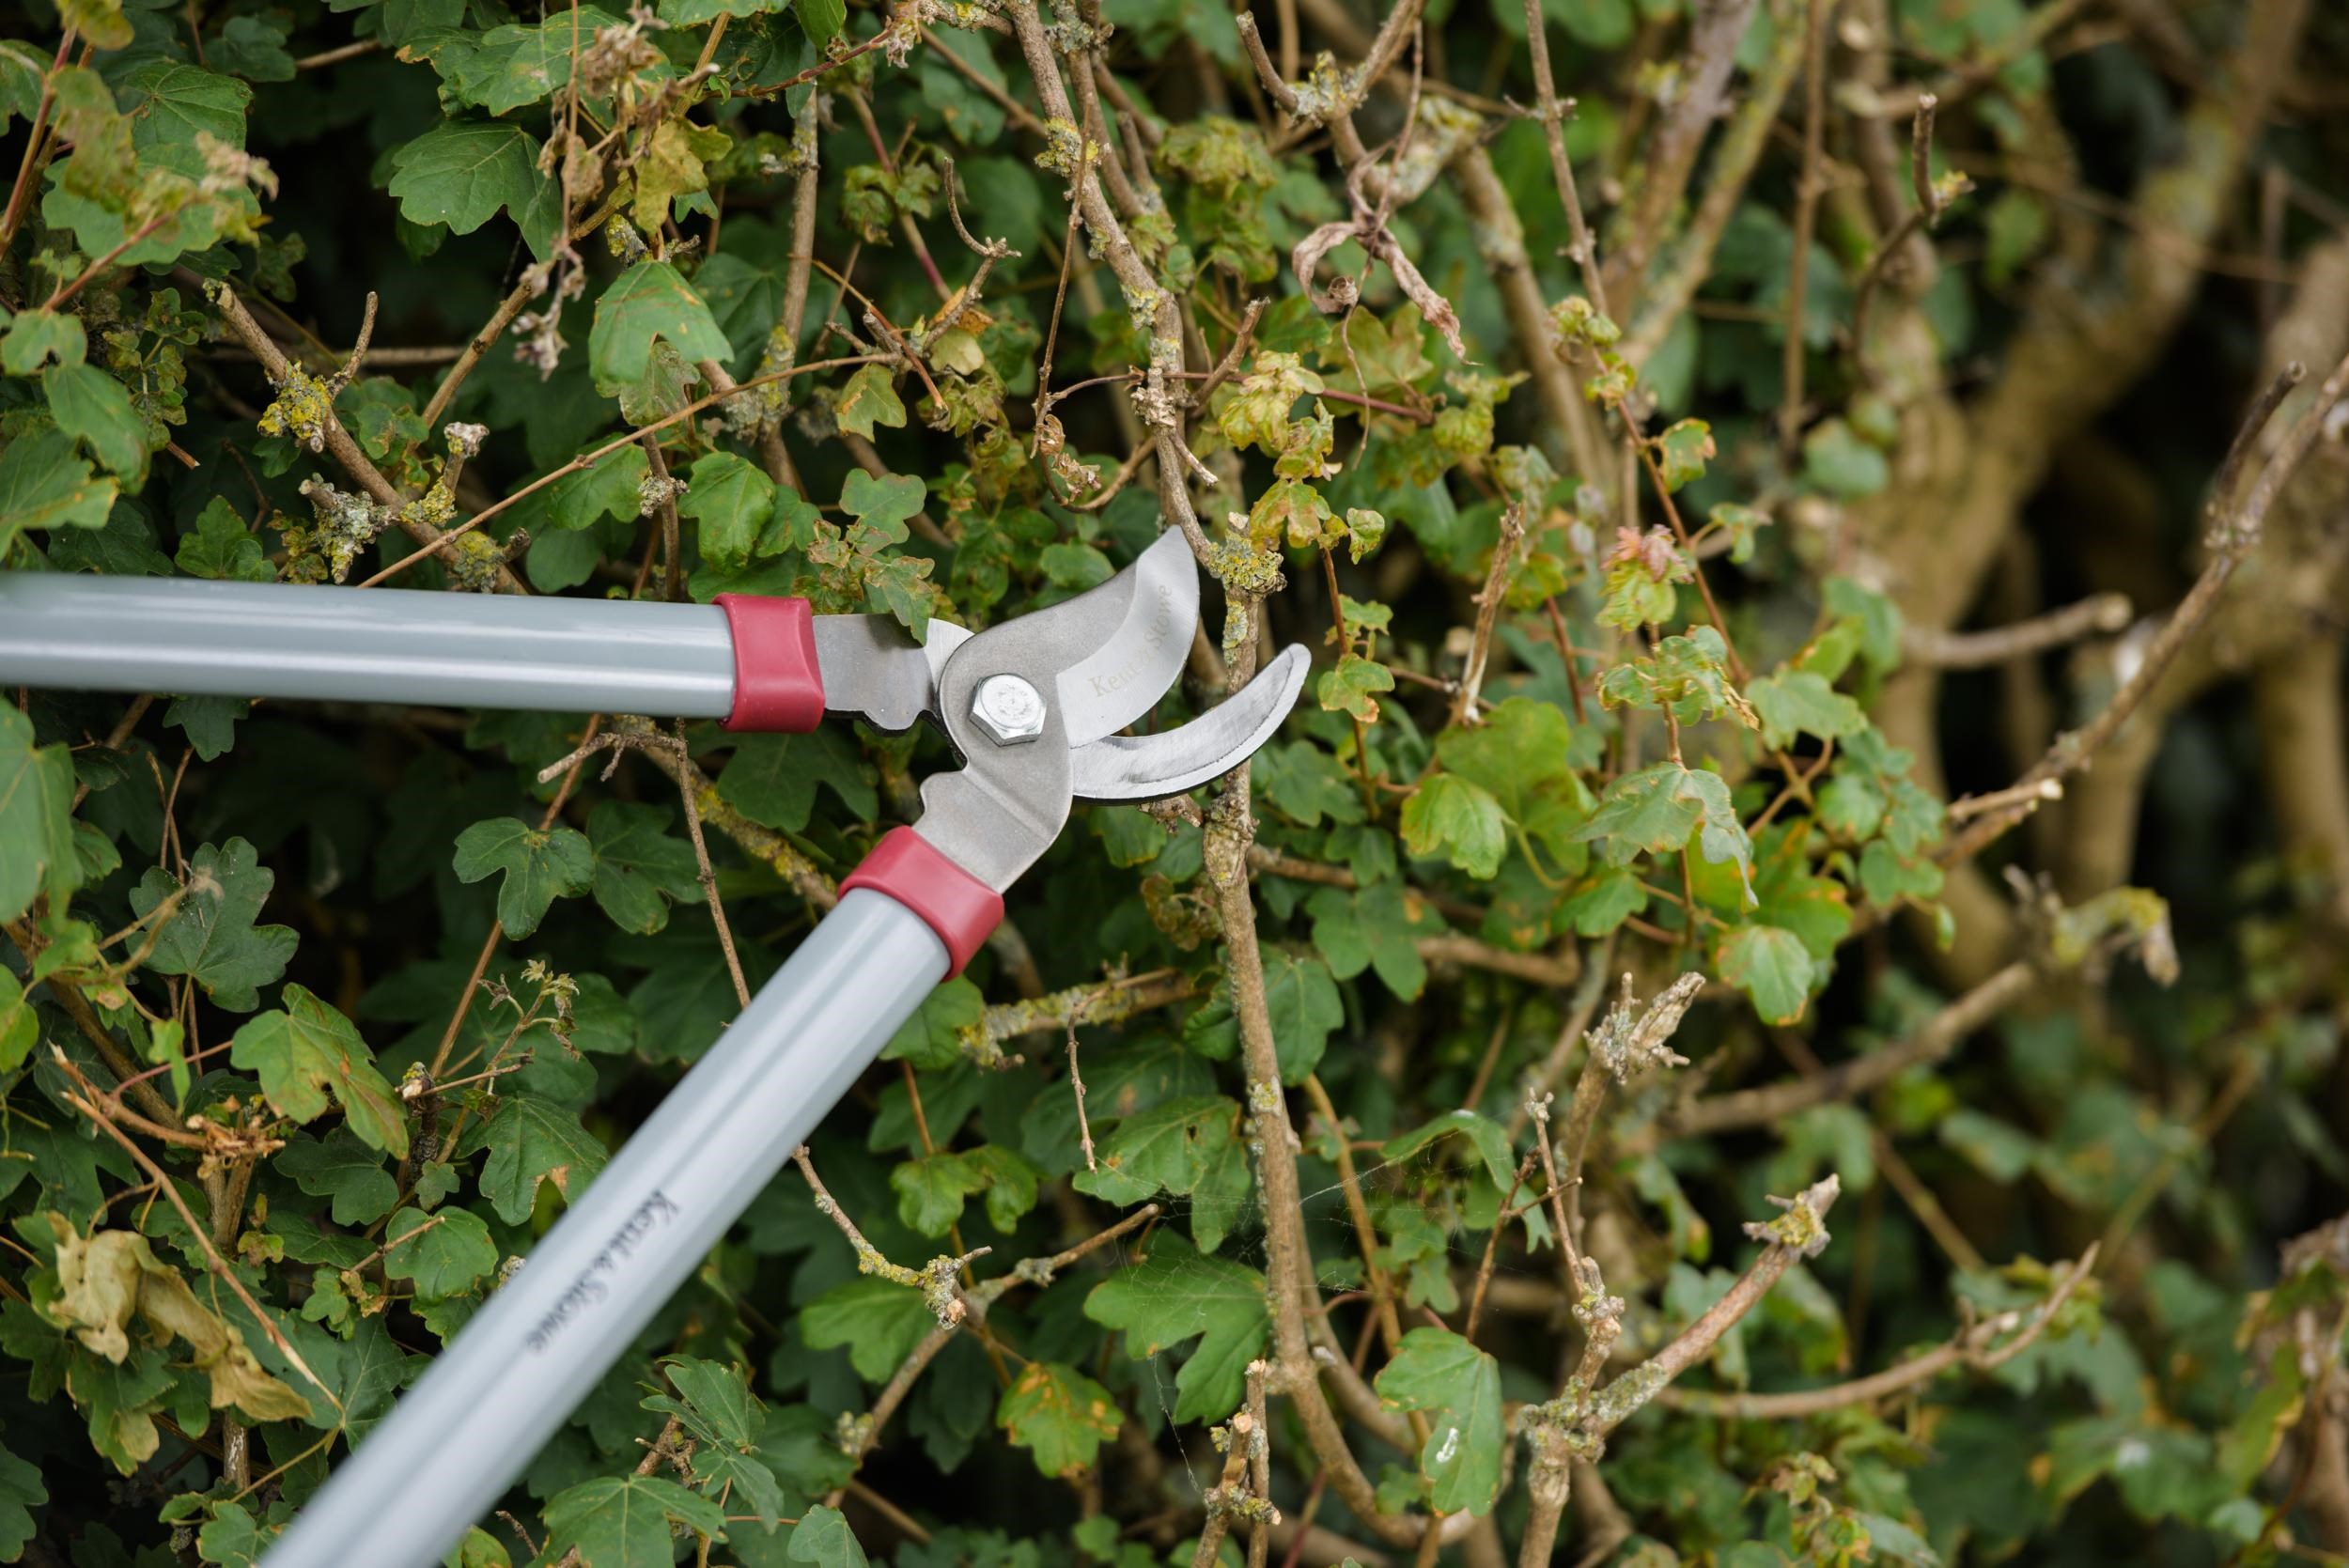 66.5cm General Purpose Garden Loppers by Kent & Stowe